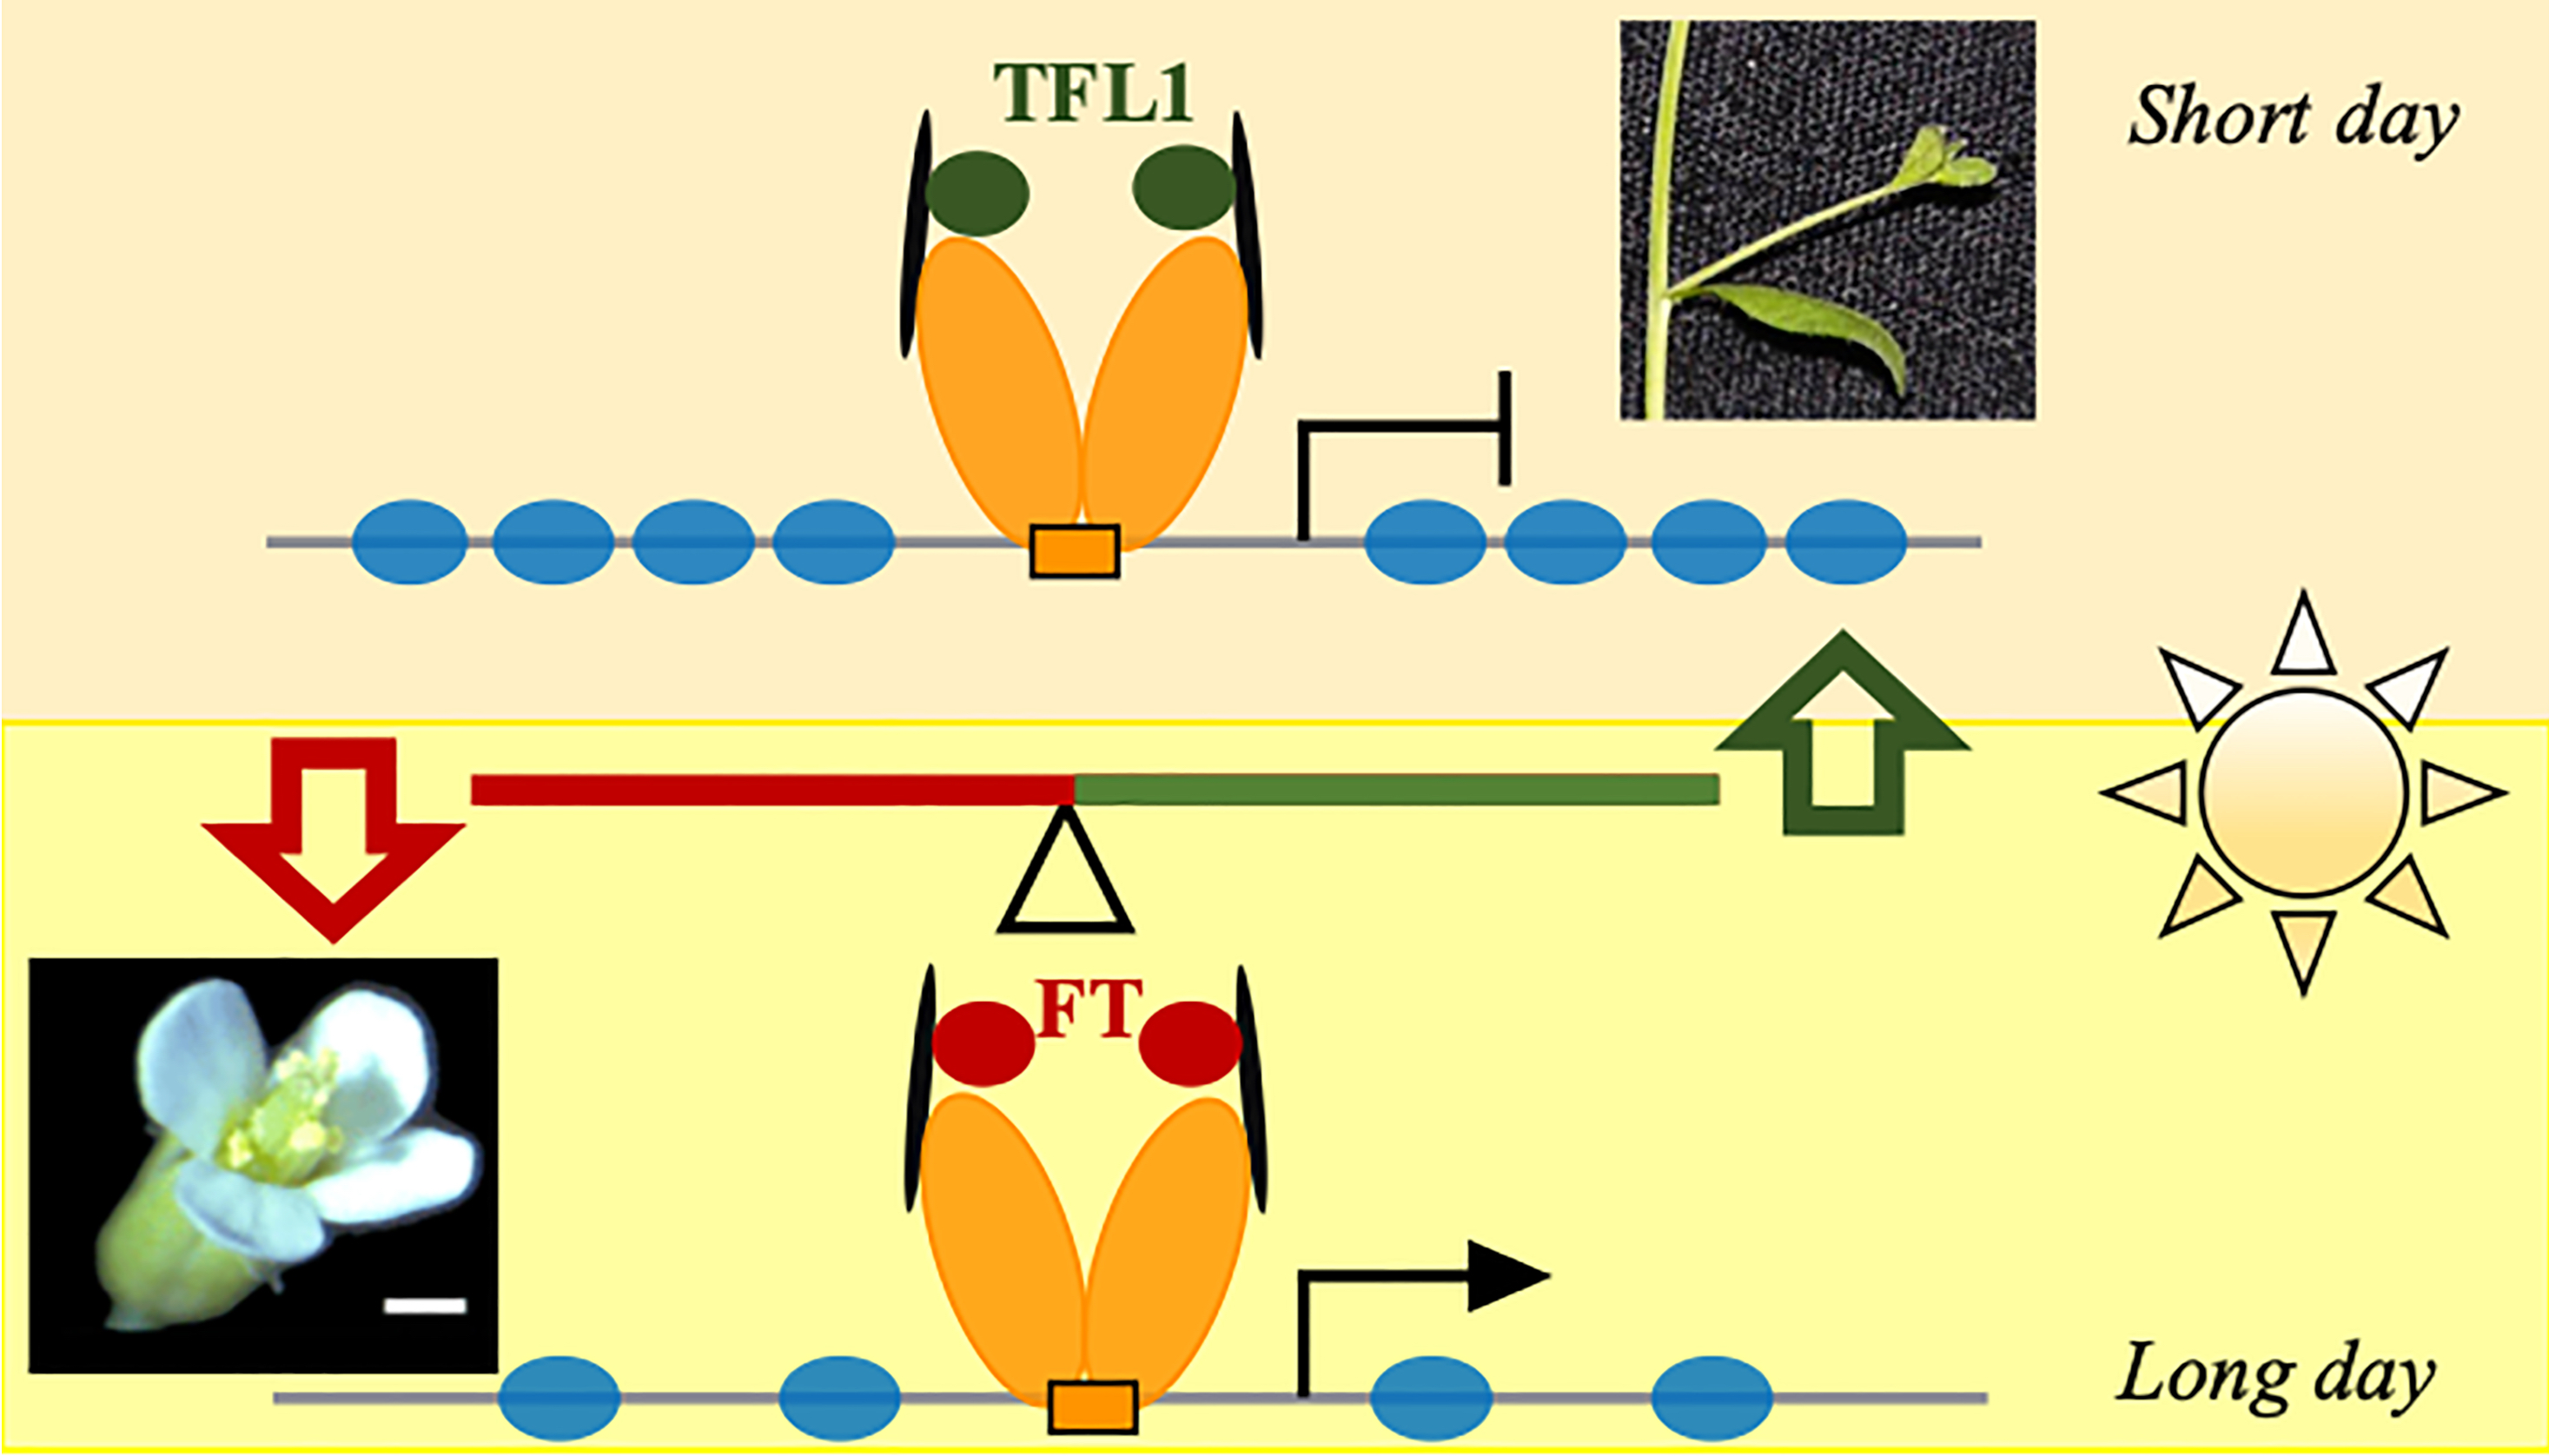 Diagram of the role of two molecules in plants, TFL1 and FT, which act differently in short versus long days